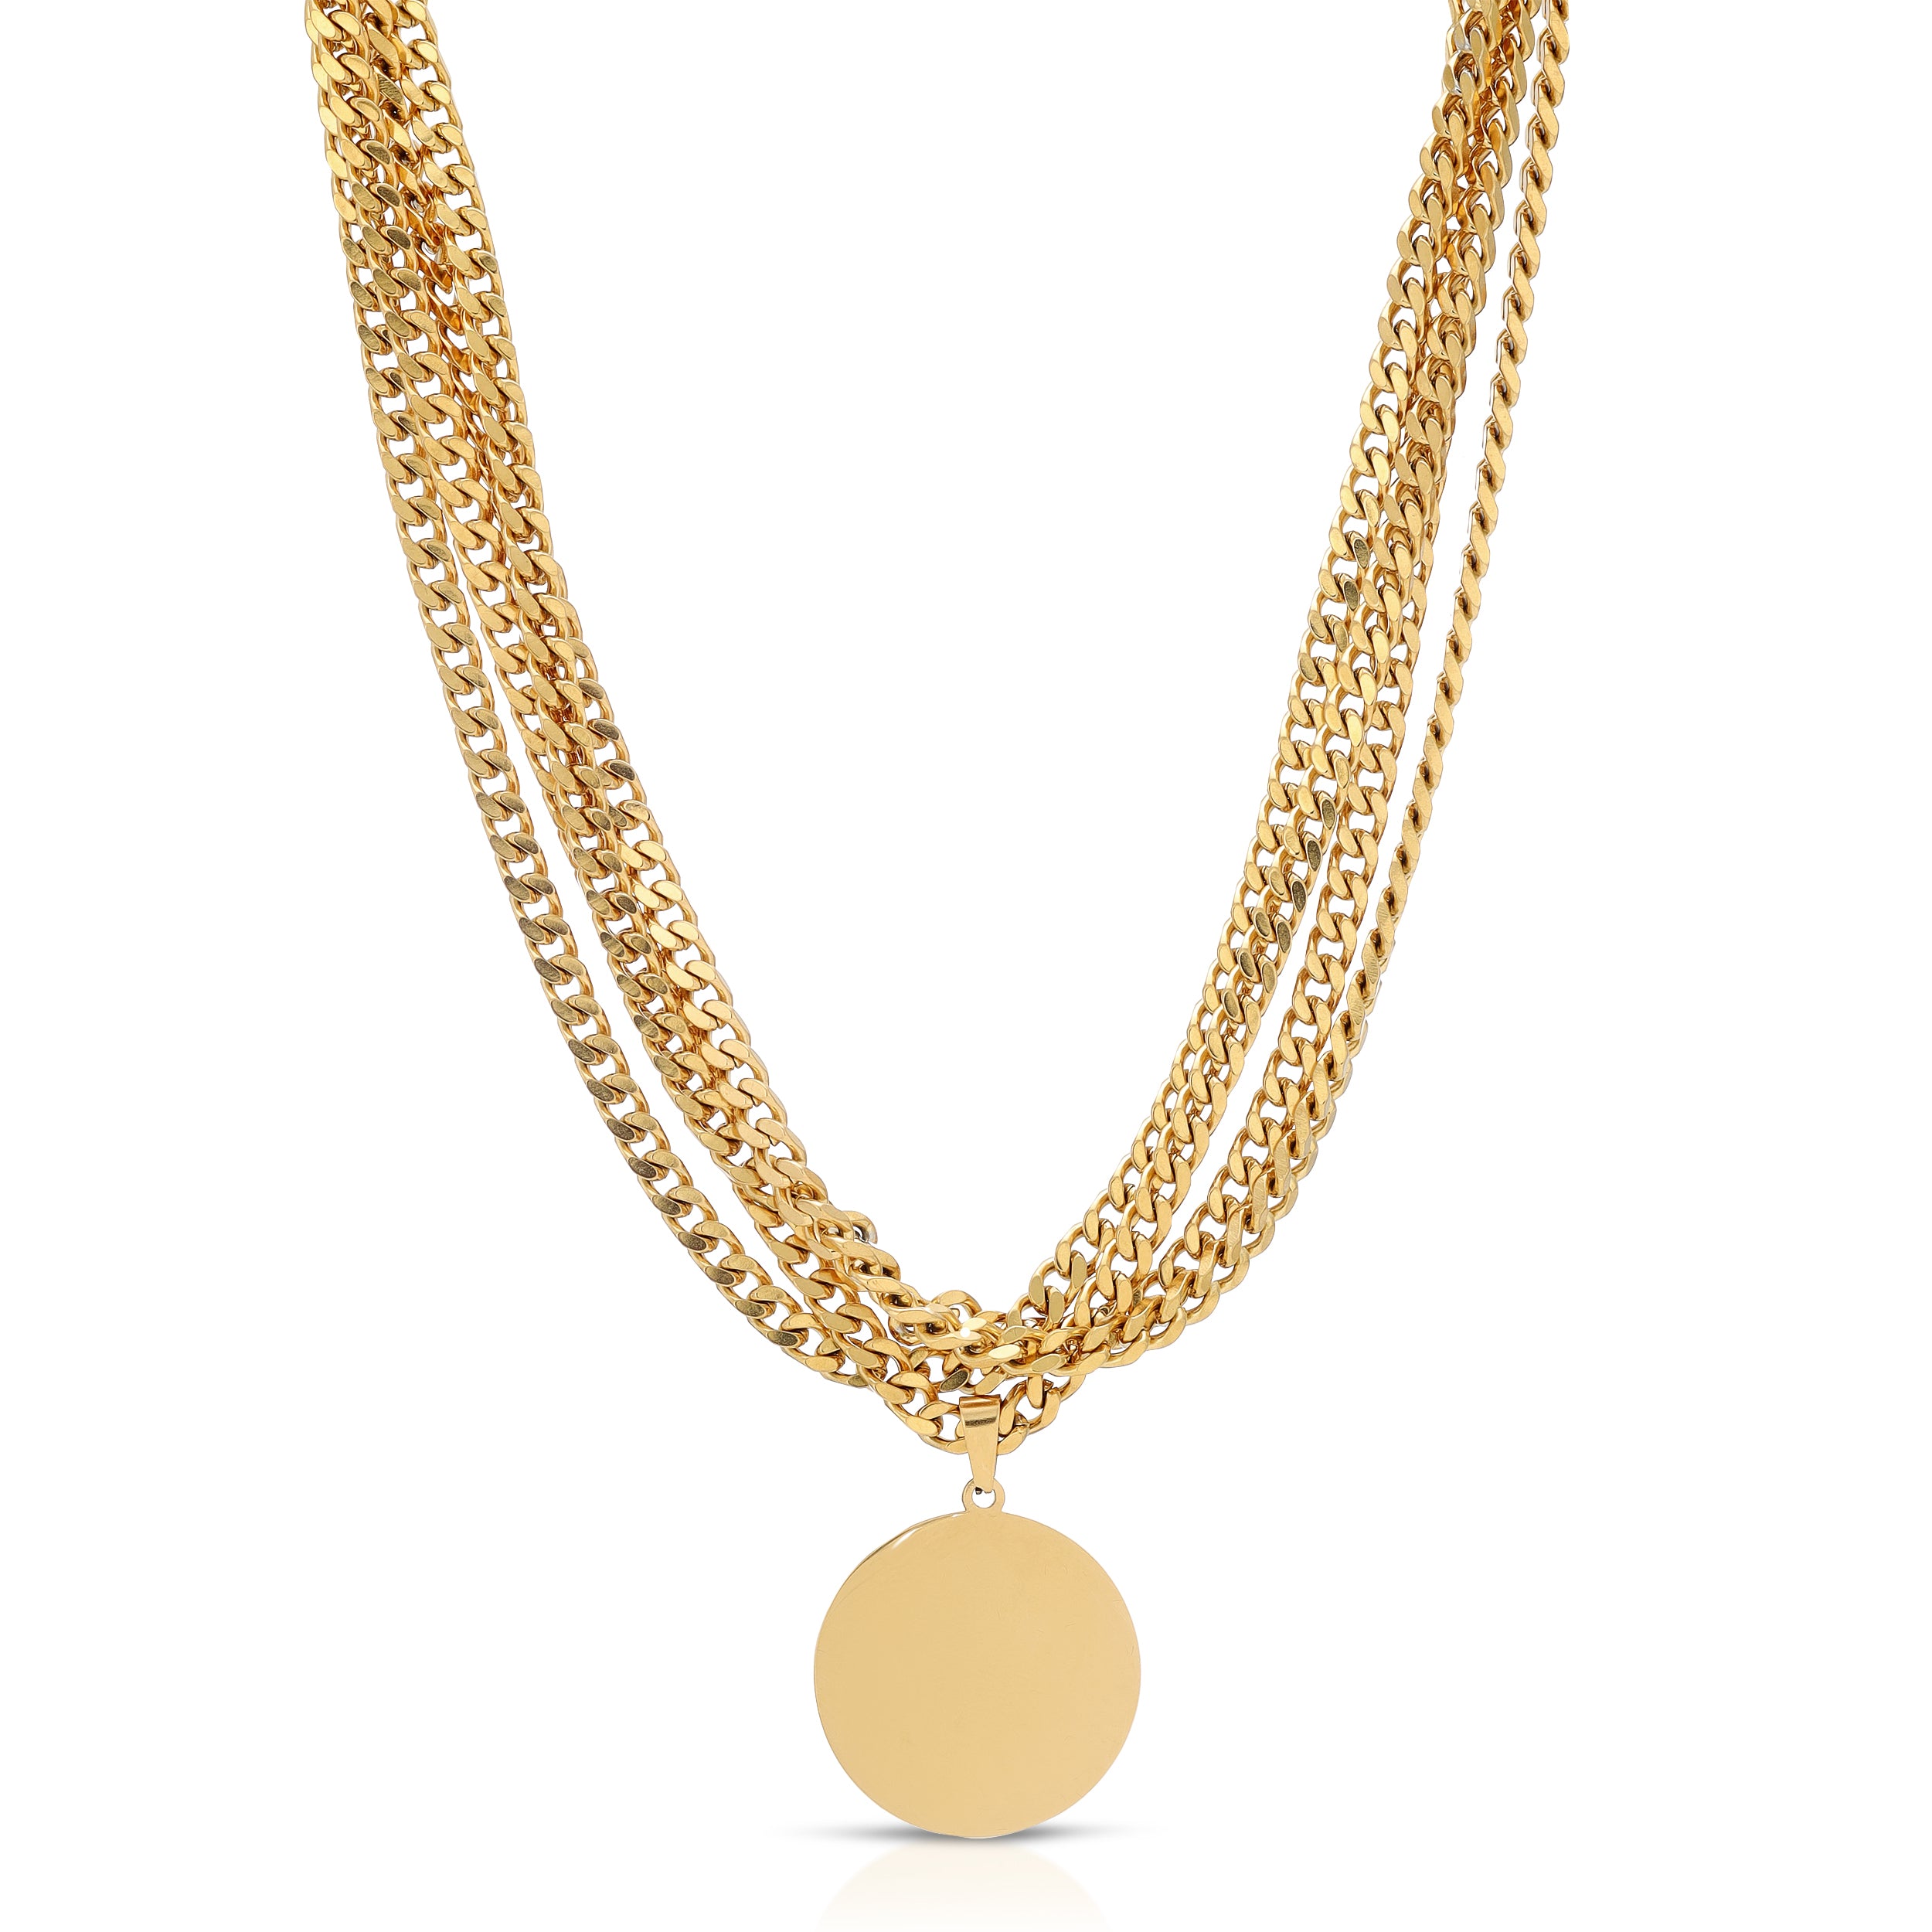 Chain Reaction Stacked Gold Pendant Necklace | | Chain Necklace Women | Chain Reaction Necklace - JaJaara